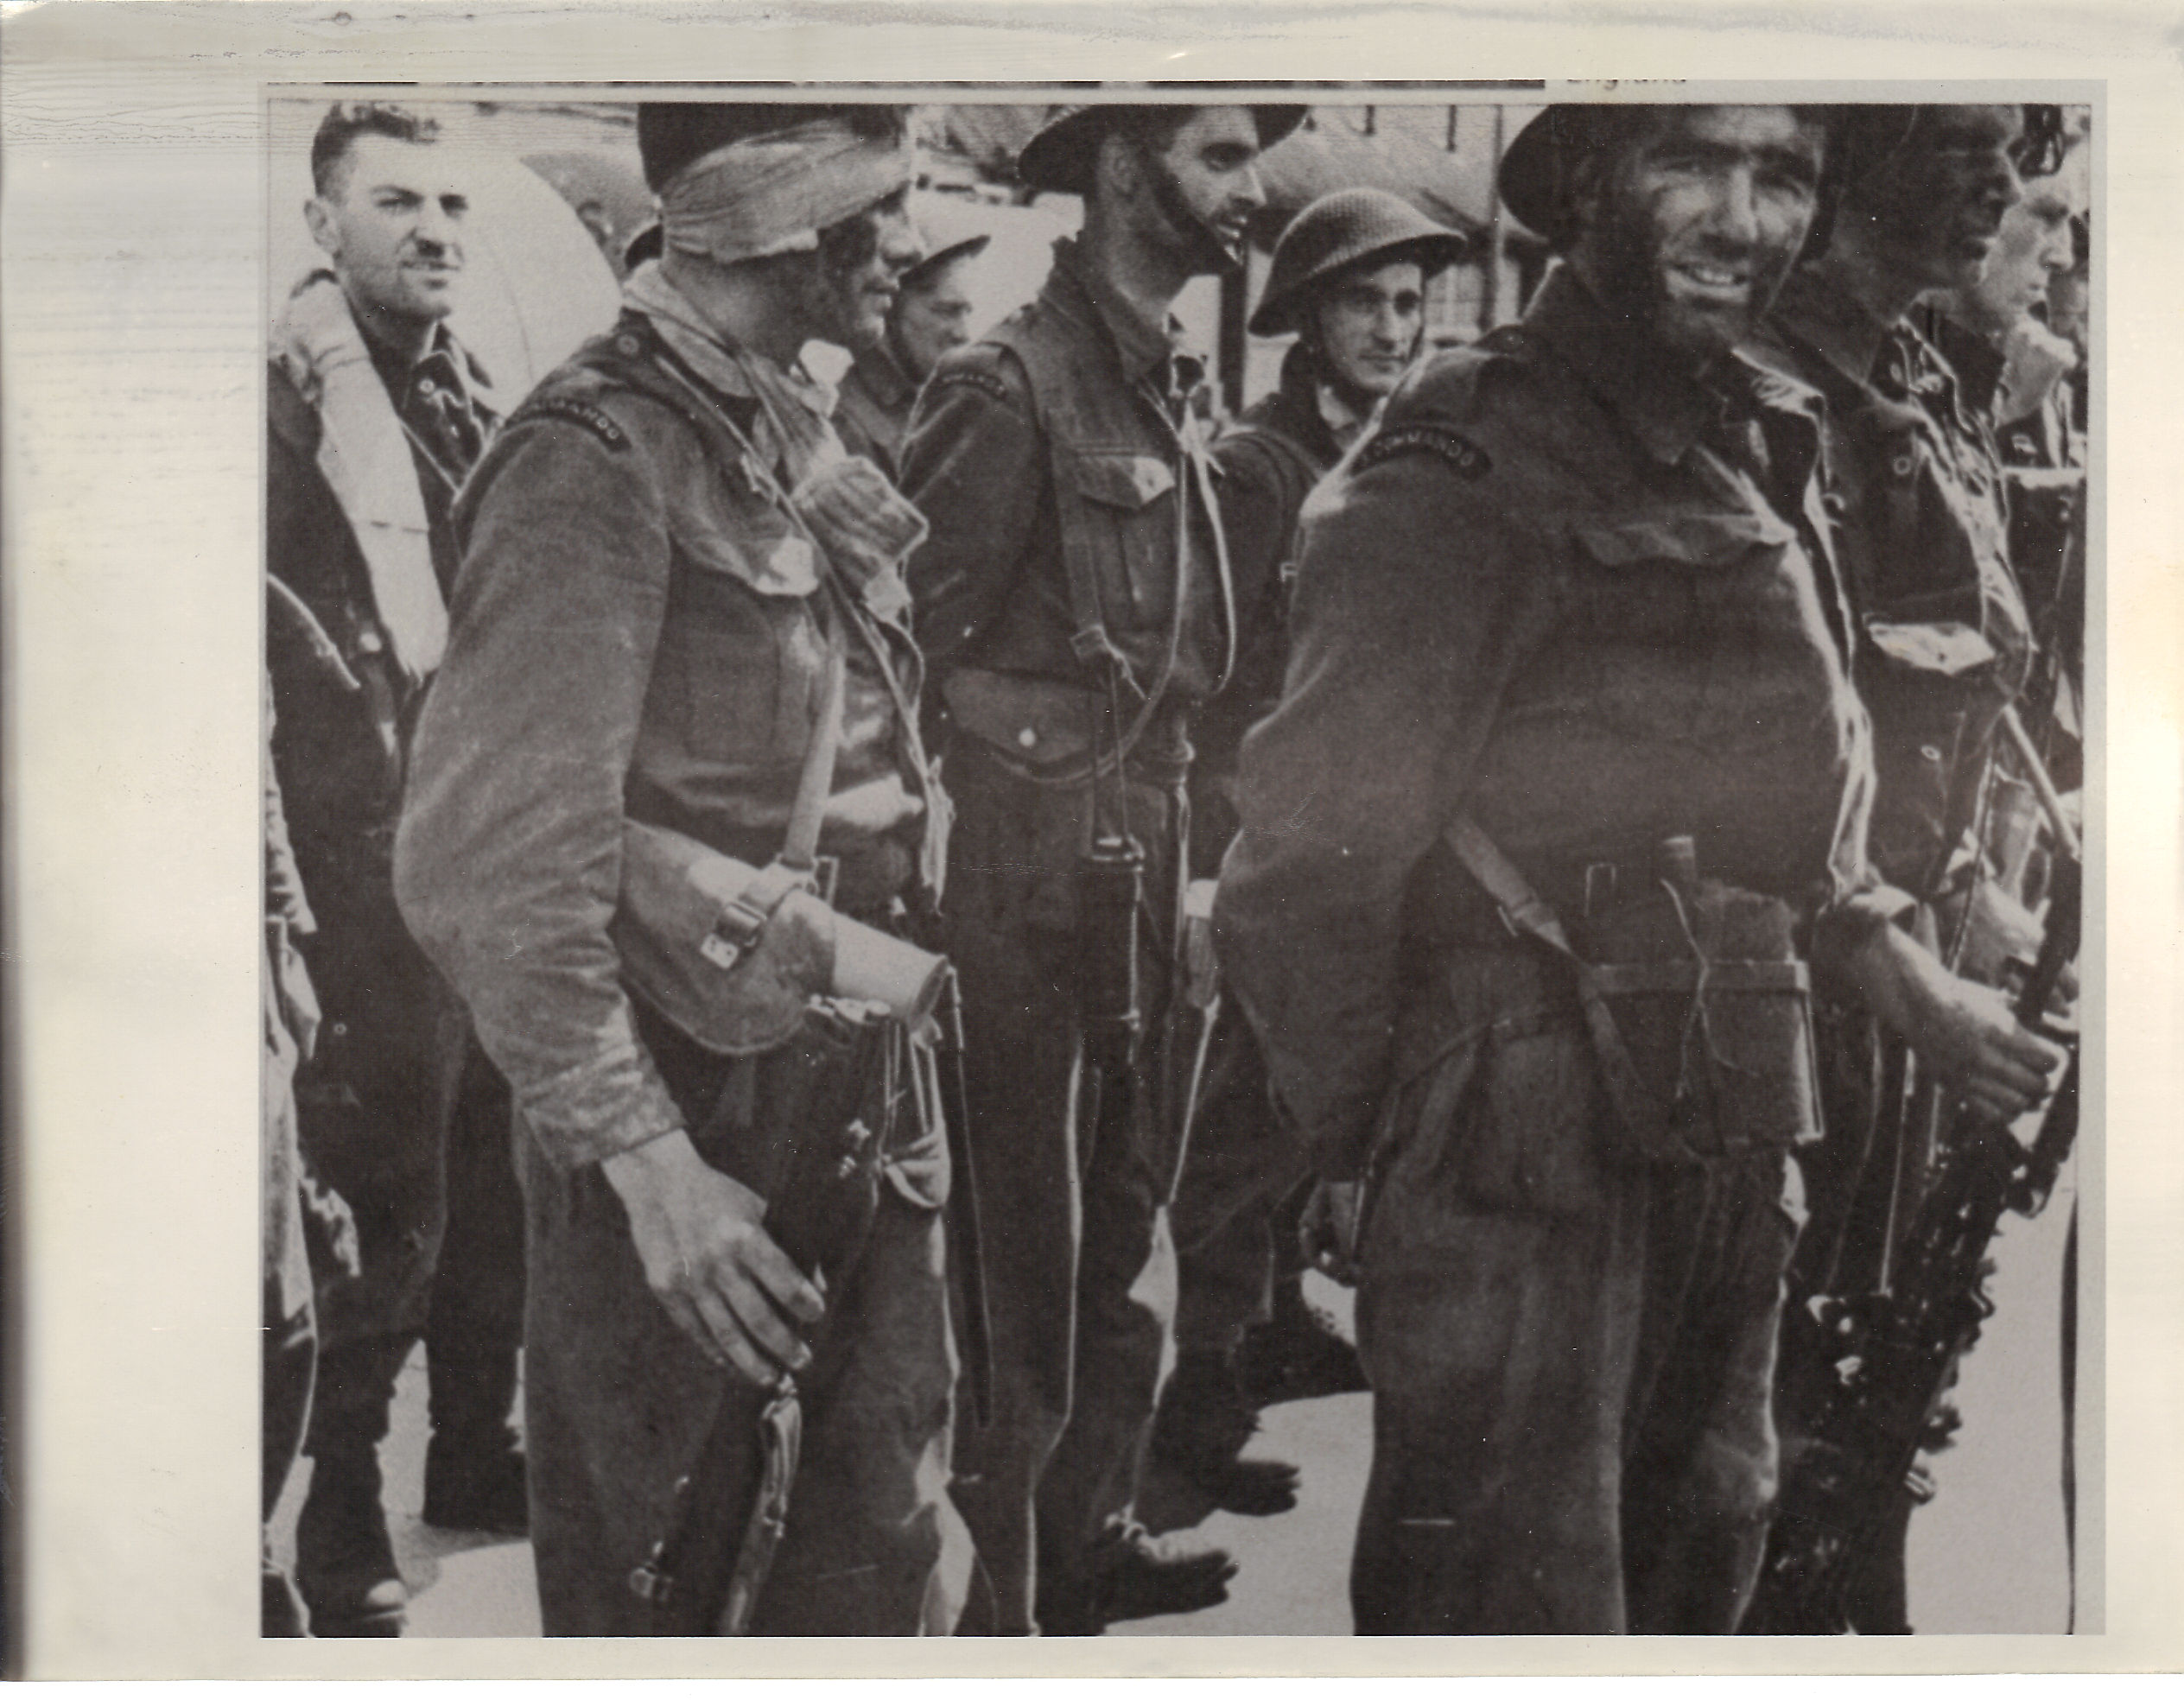 Tpr. Victor Adderton MM (No.3 Cdo) (centre rank at rear) and others after Dieppe raid